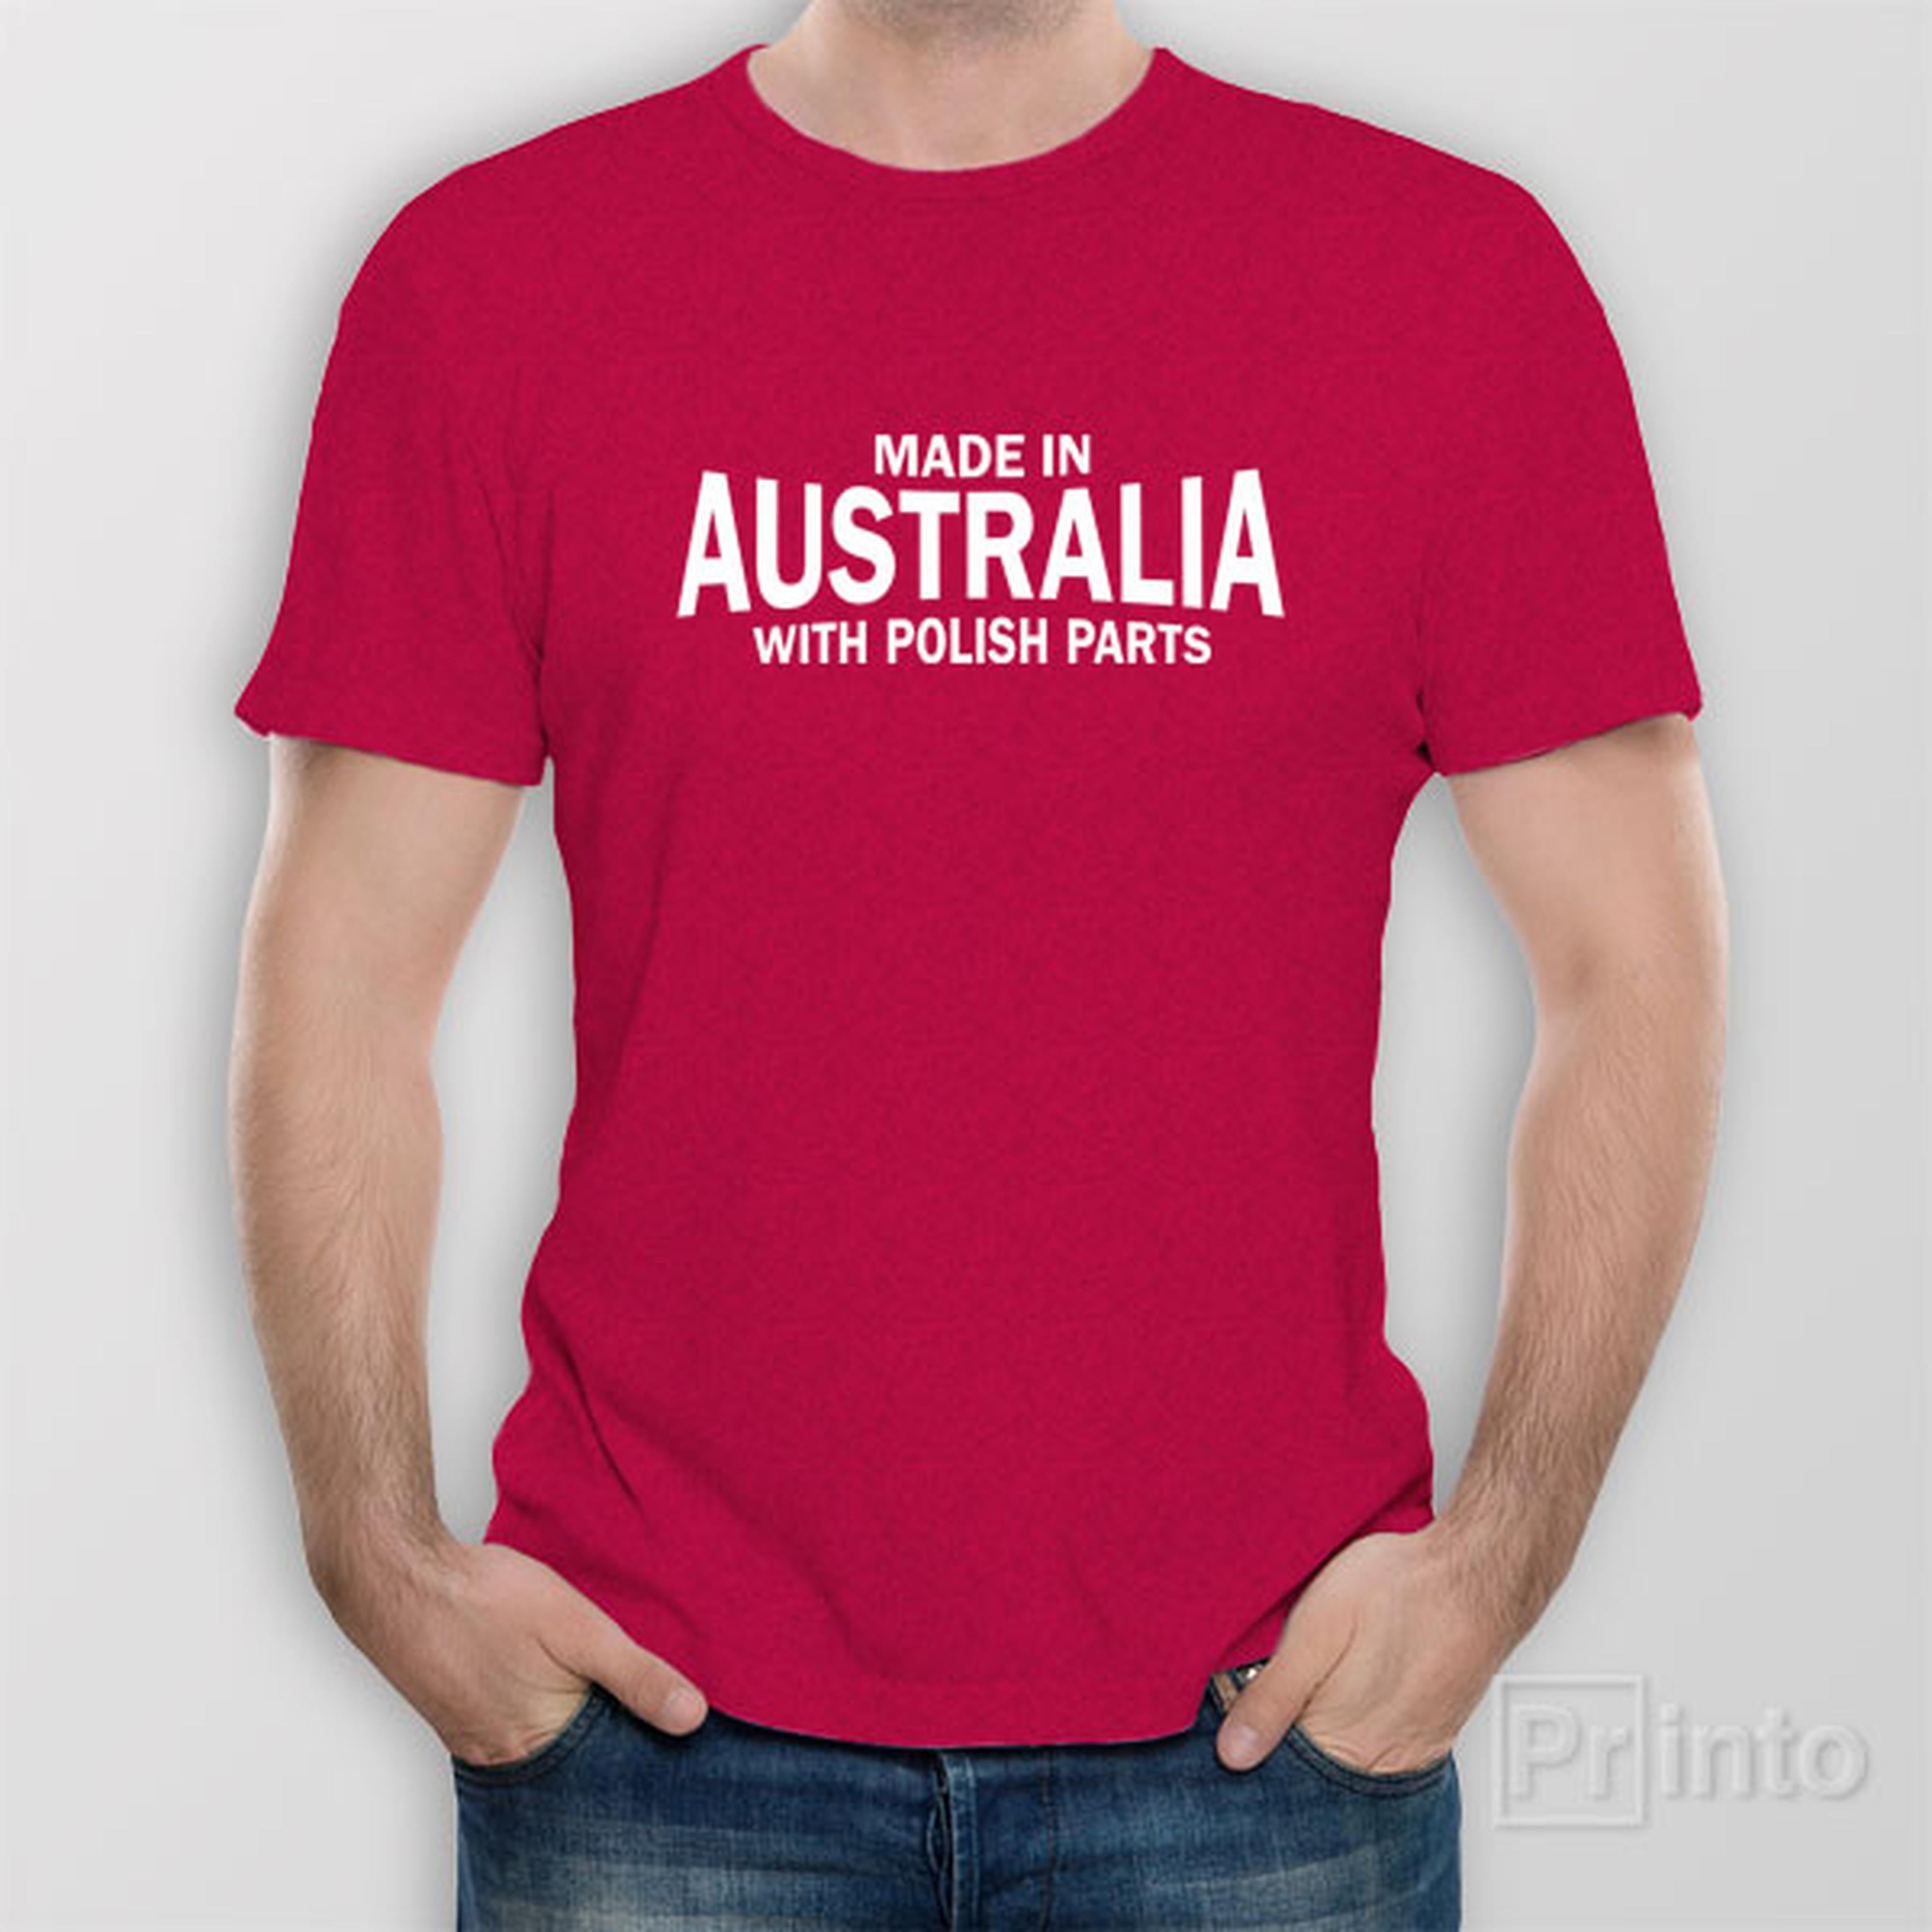 made-in-australia-with-polish-parts-t-shirt